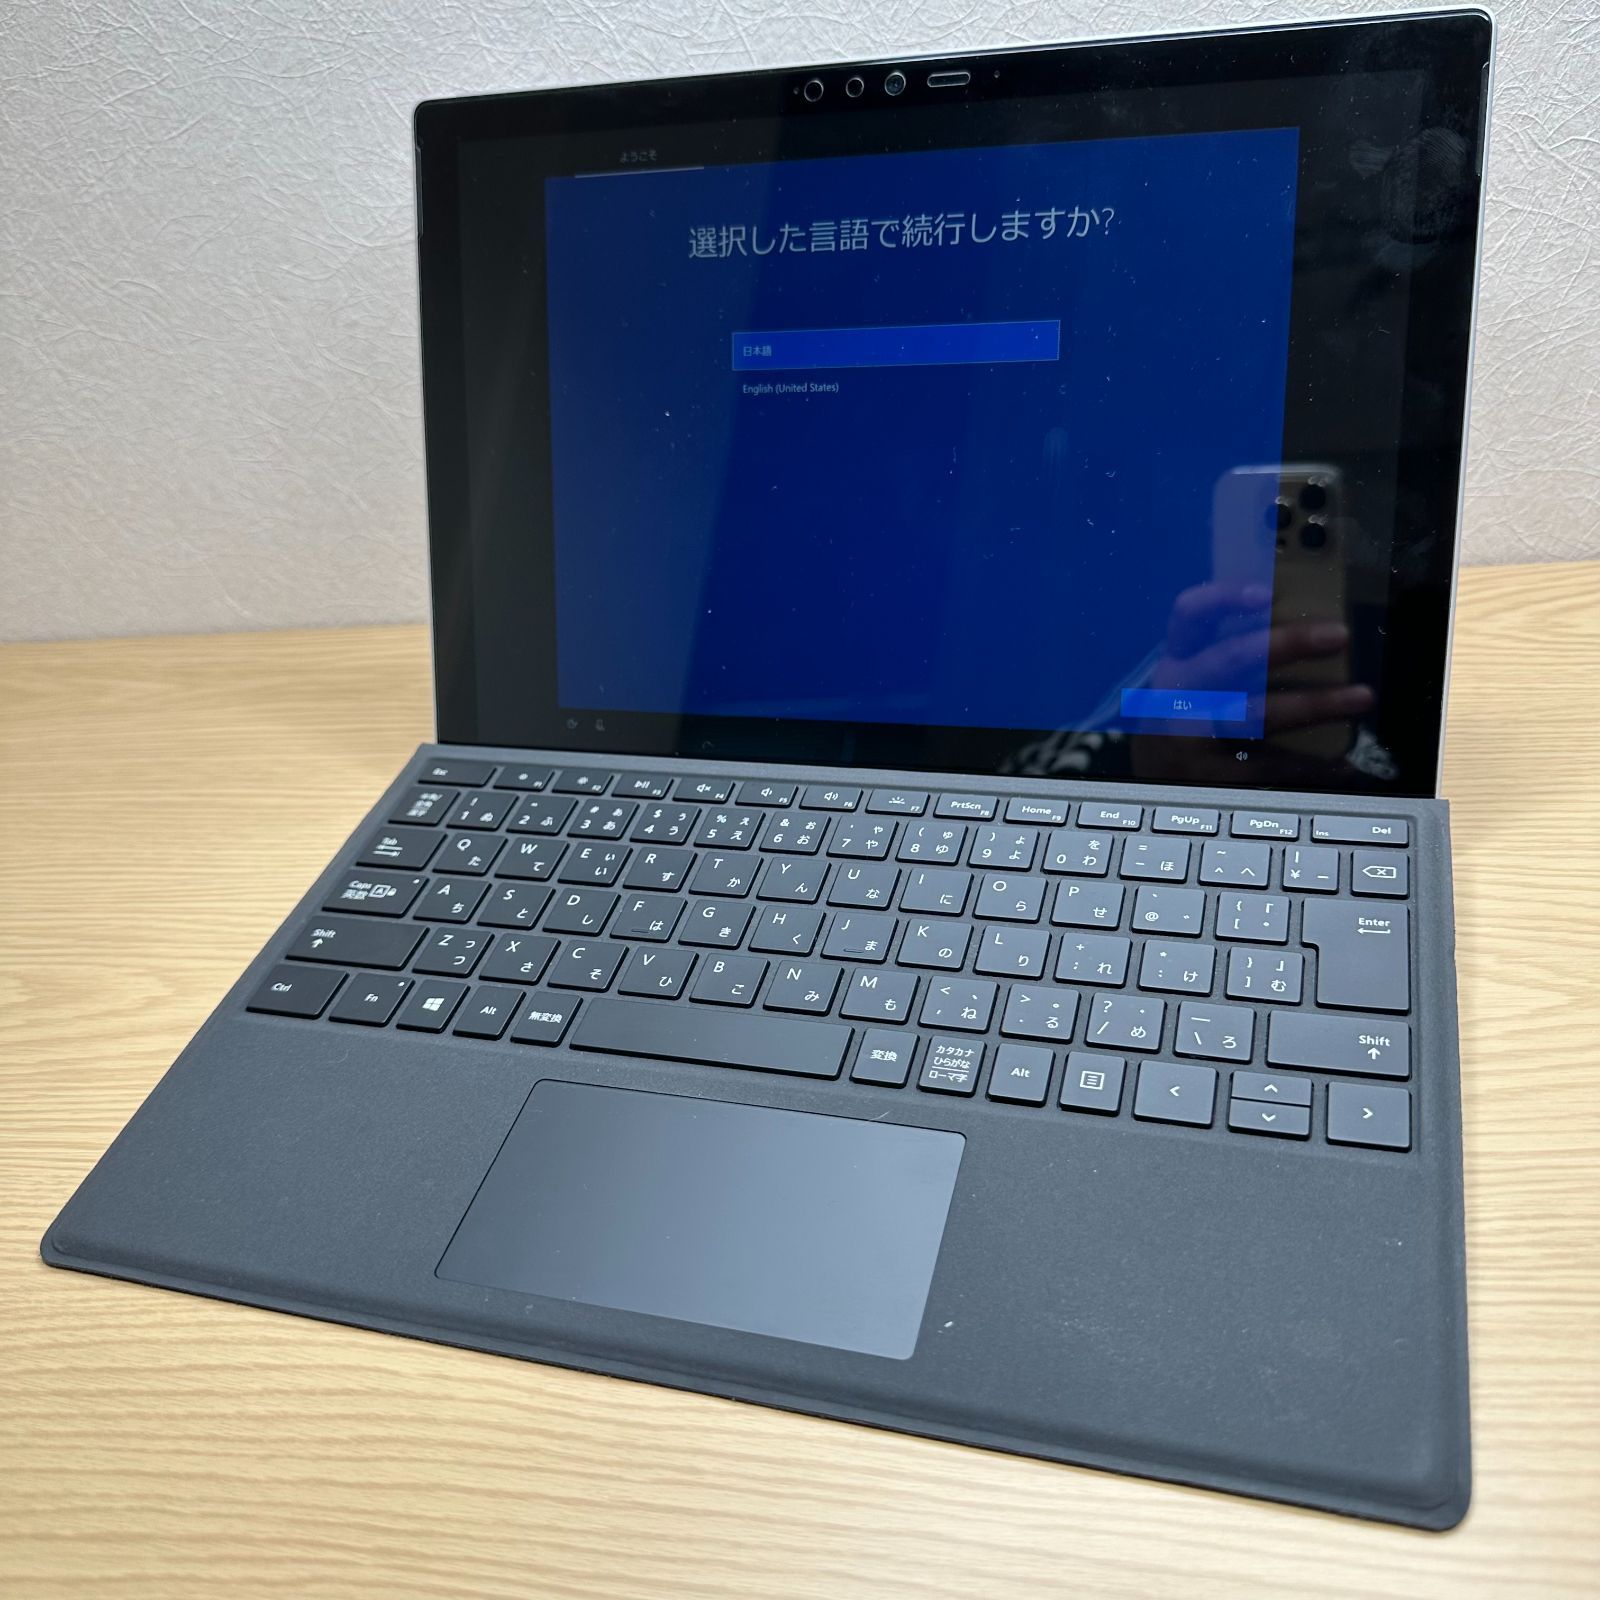 Microsoft Surface Pro 7 VDH-00012 Oficce Home & Business タイプ